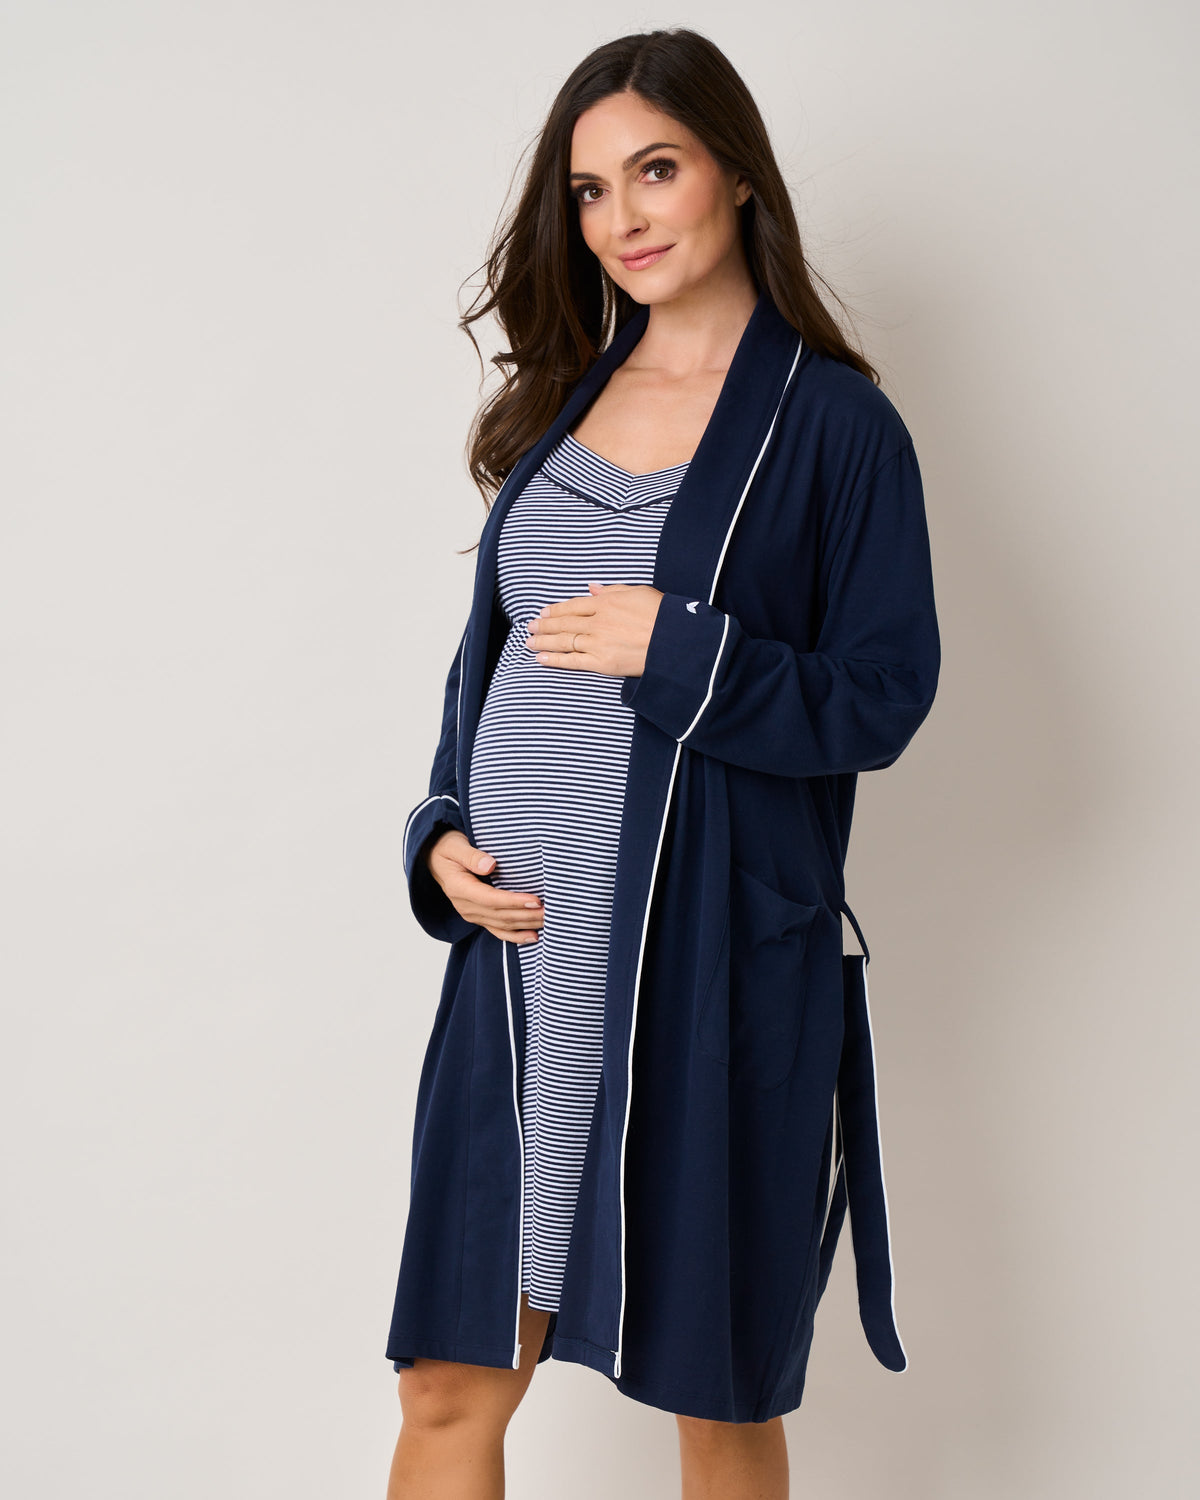 The Essential Maternity Set in Navy & Navy Stripe